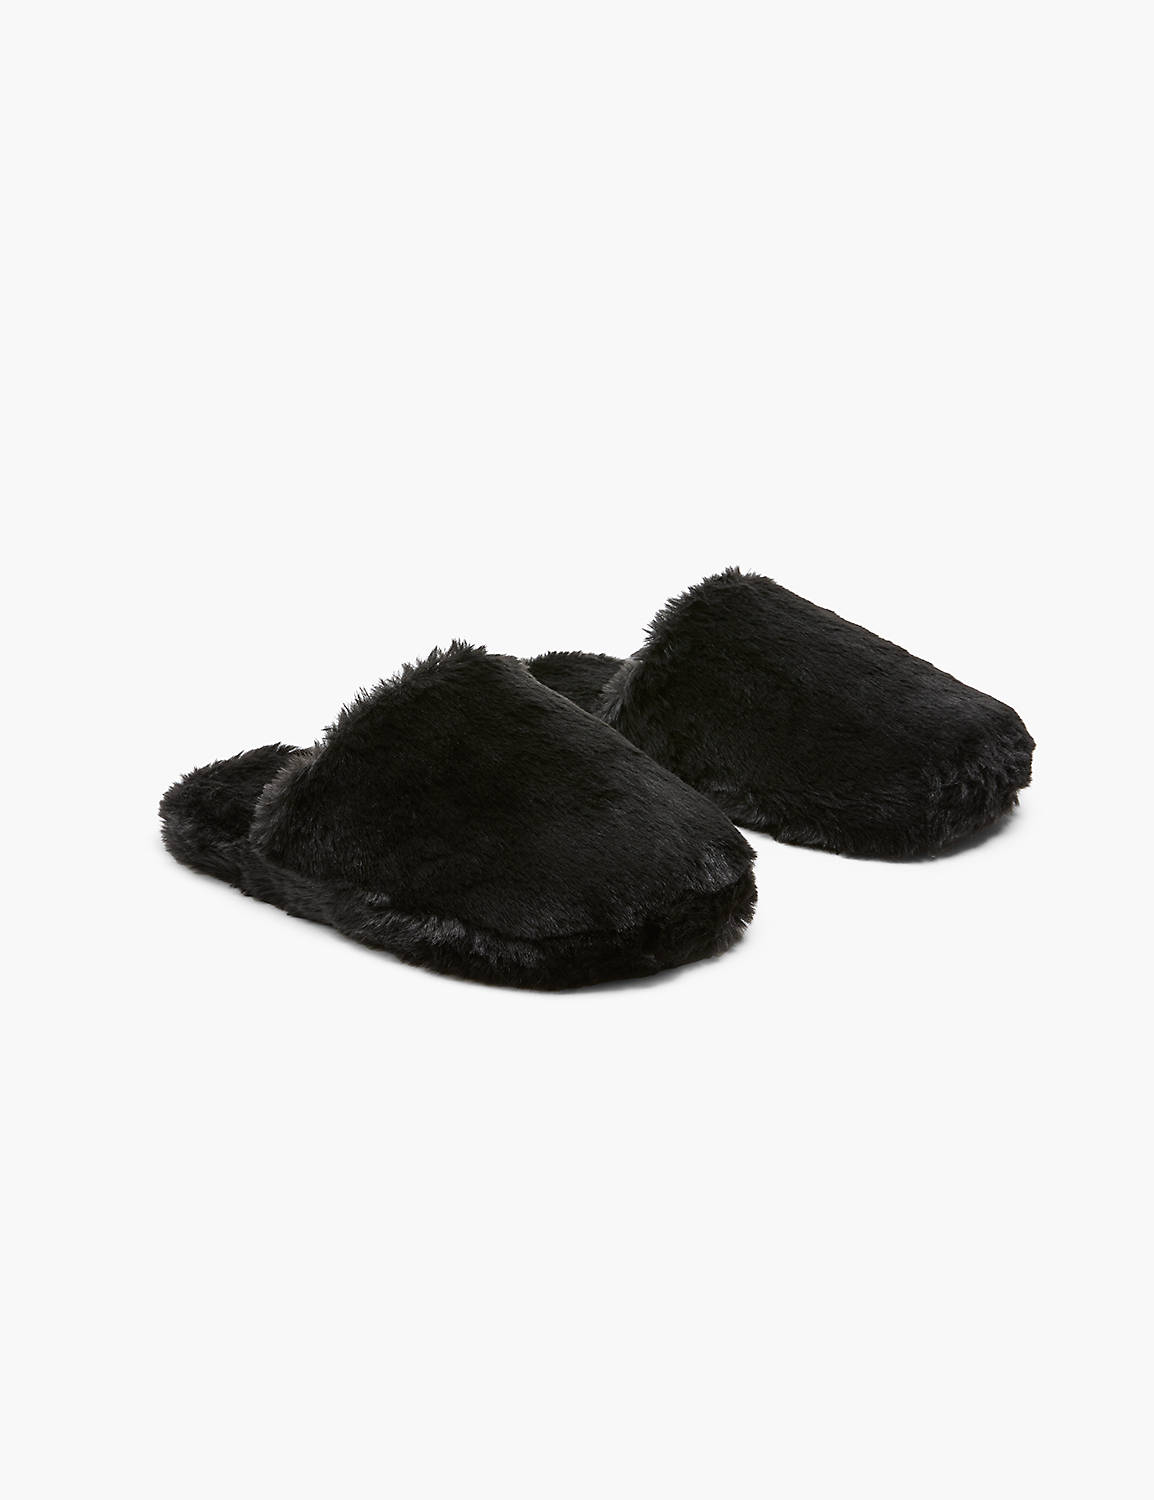 FAUX FUR SLIDE SLIPPERS Product Image 1